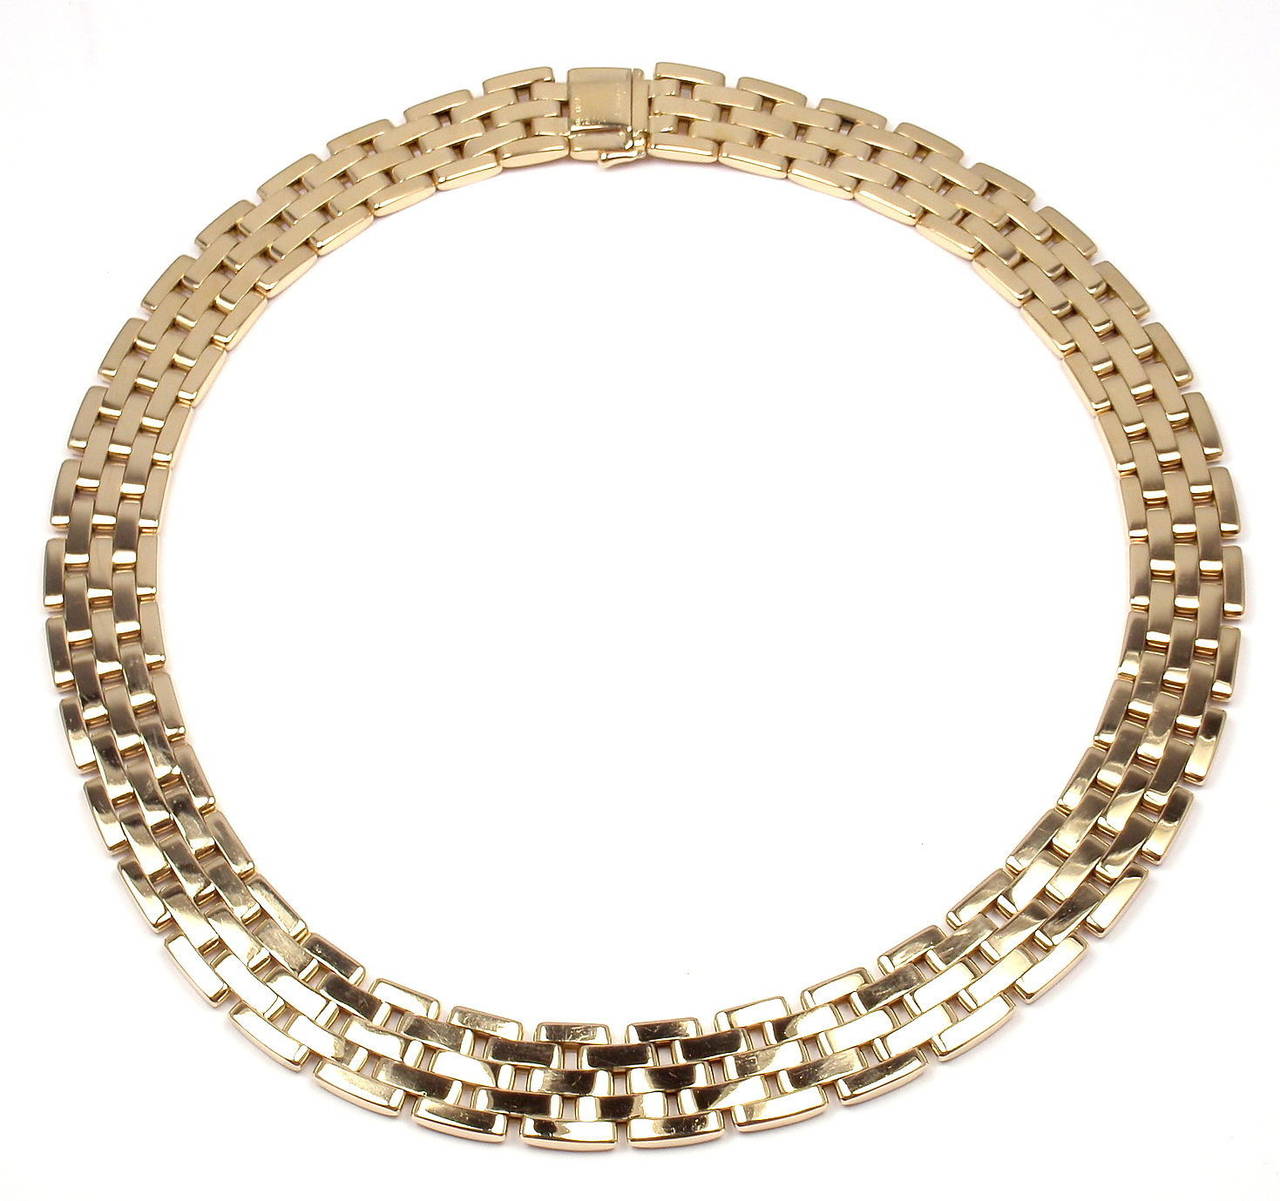 18k Yellow Gold Five-Row Maillion Panthere Necklace by Cartier.
This stunning necklace comes with an original Cartier box & Certificate.

Details:
Weight:  152.3 grams
Length: 16